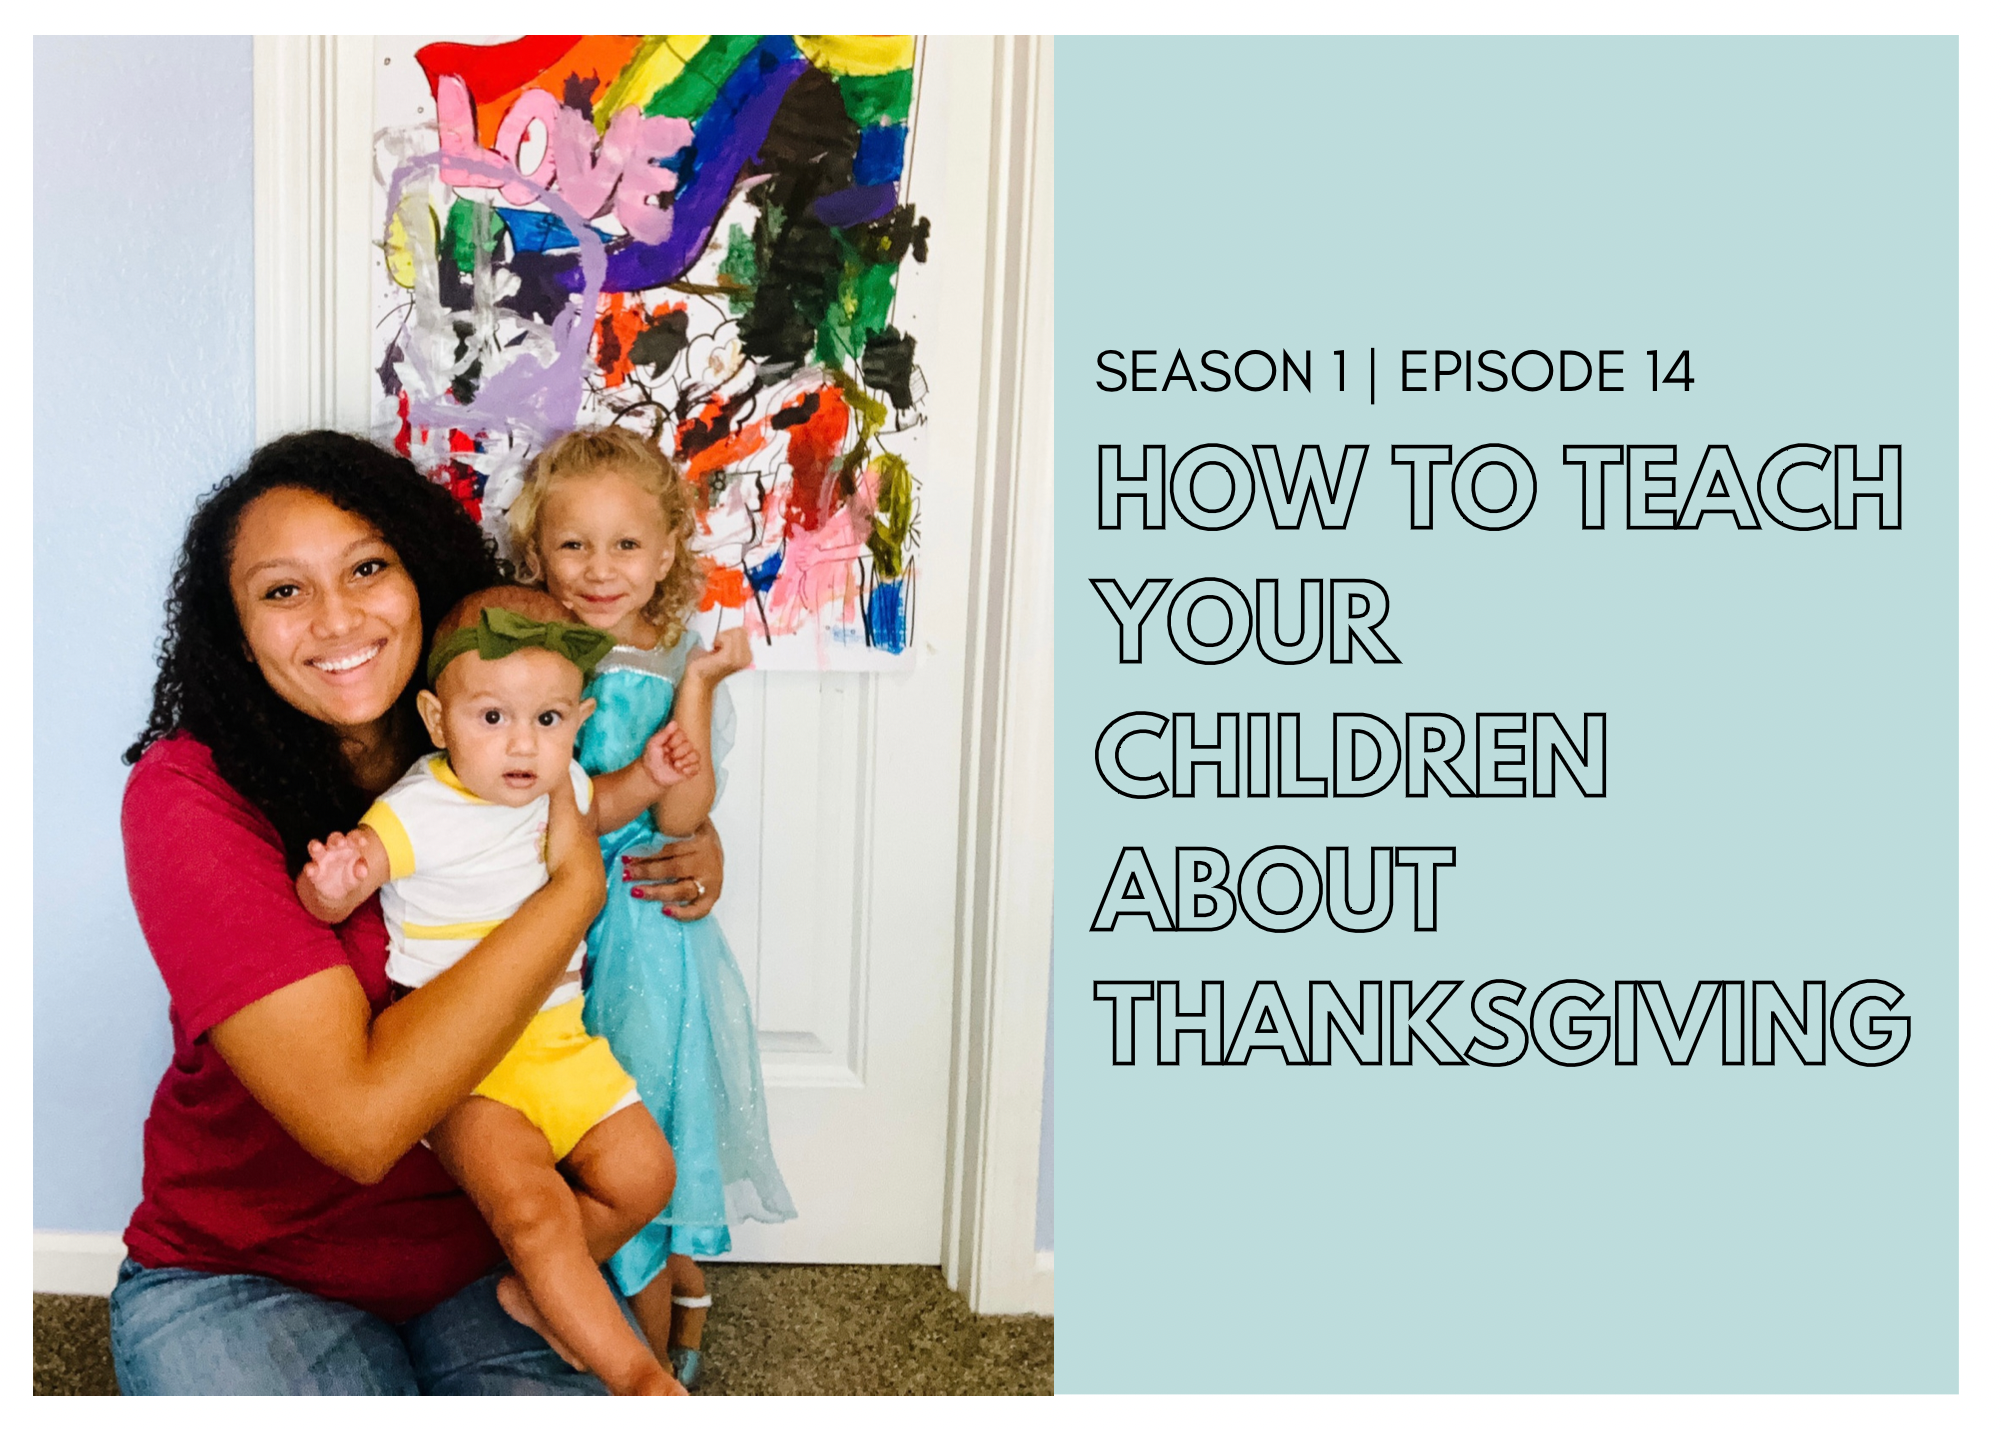 How to Teach Your Children About Thanksgiving